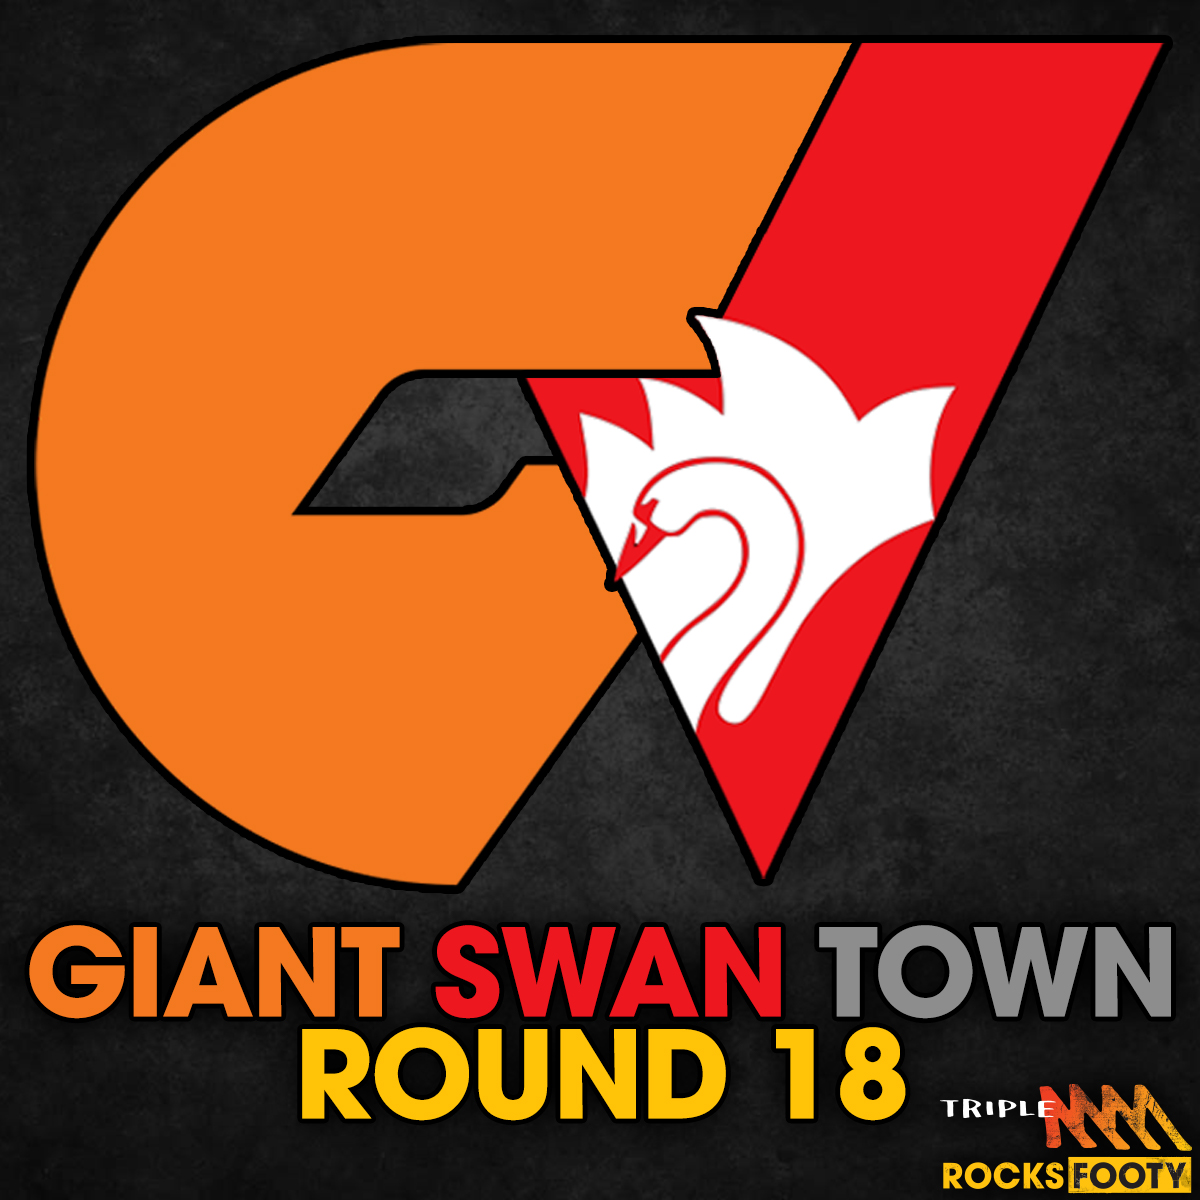 Giant Swan Town Round 18 - The Dash Brothers broken up, we speak to the Lamb Mumford Medallion winner, end of season awards, and farewell from the town